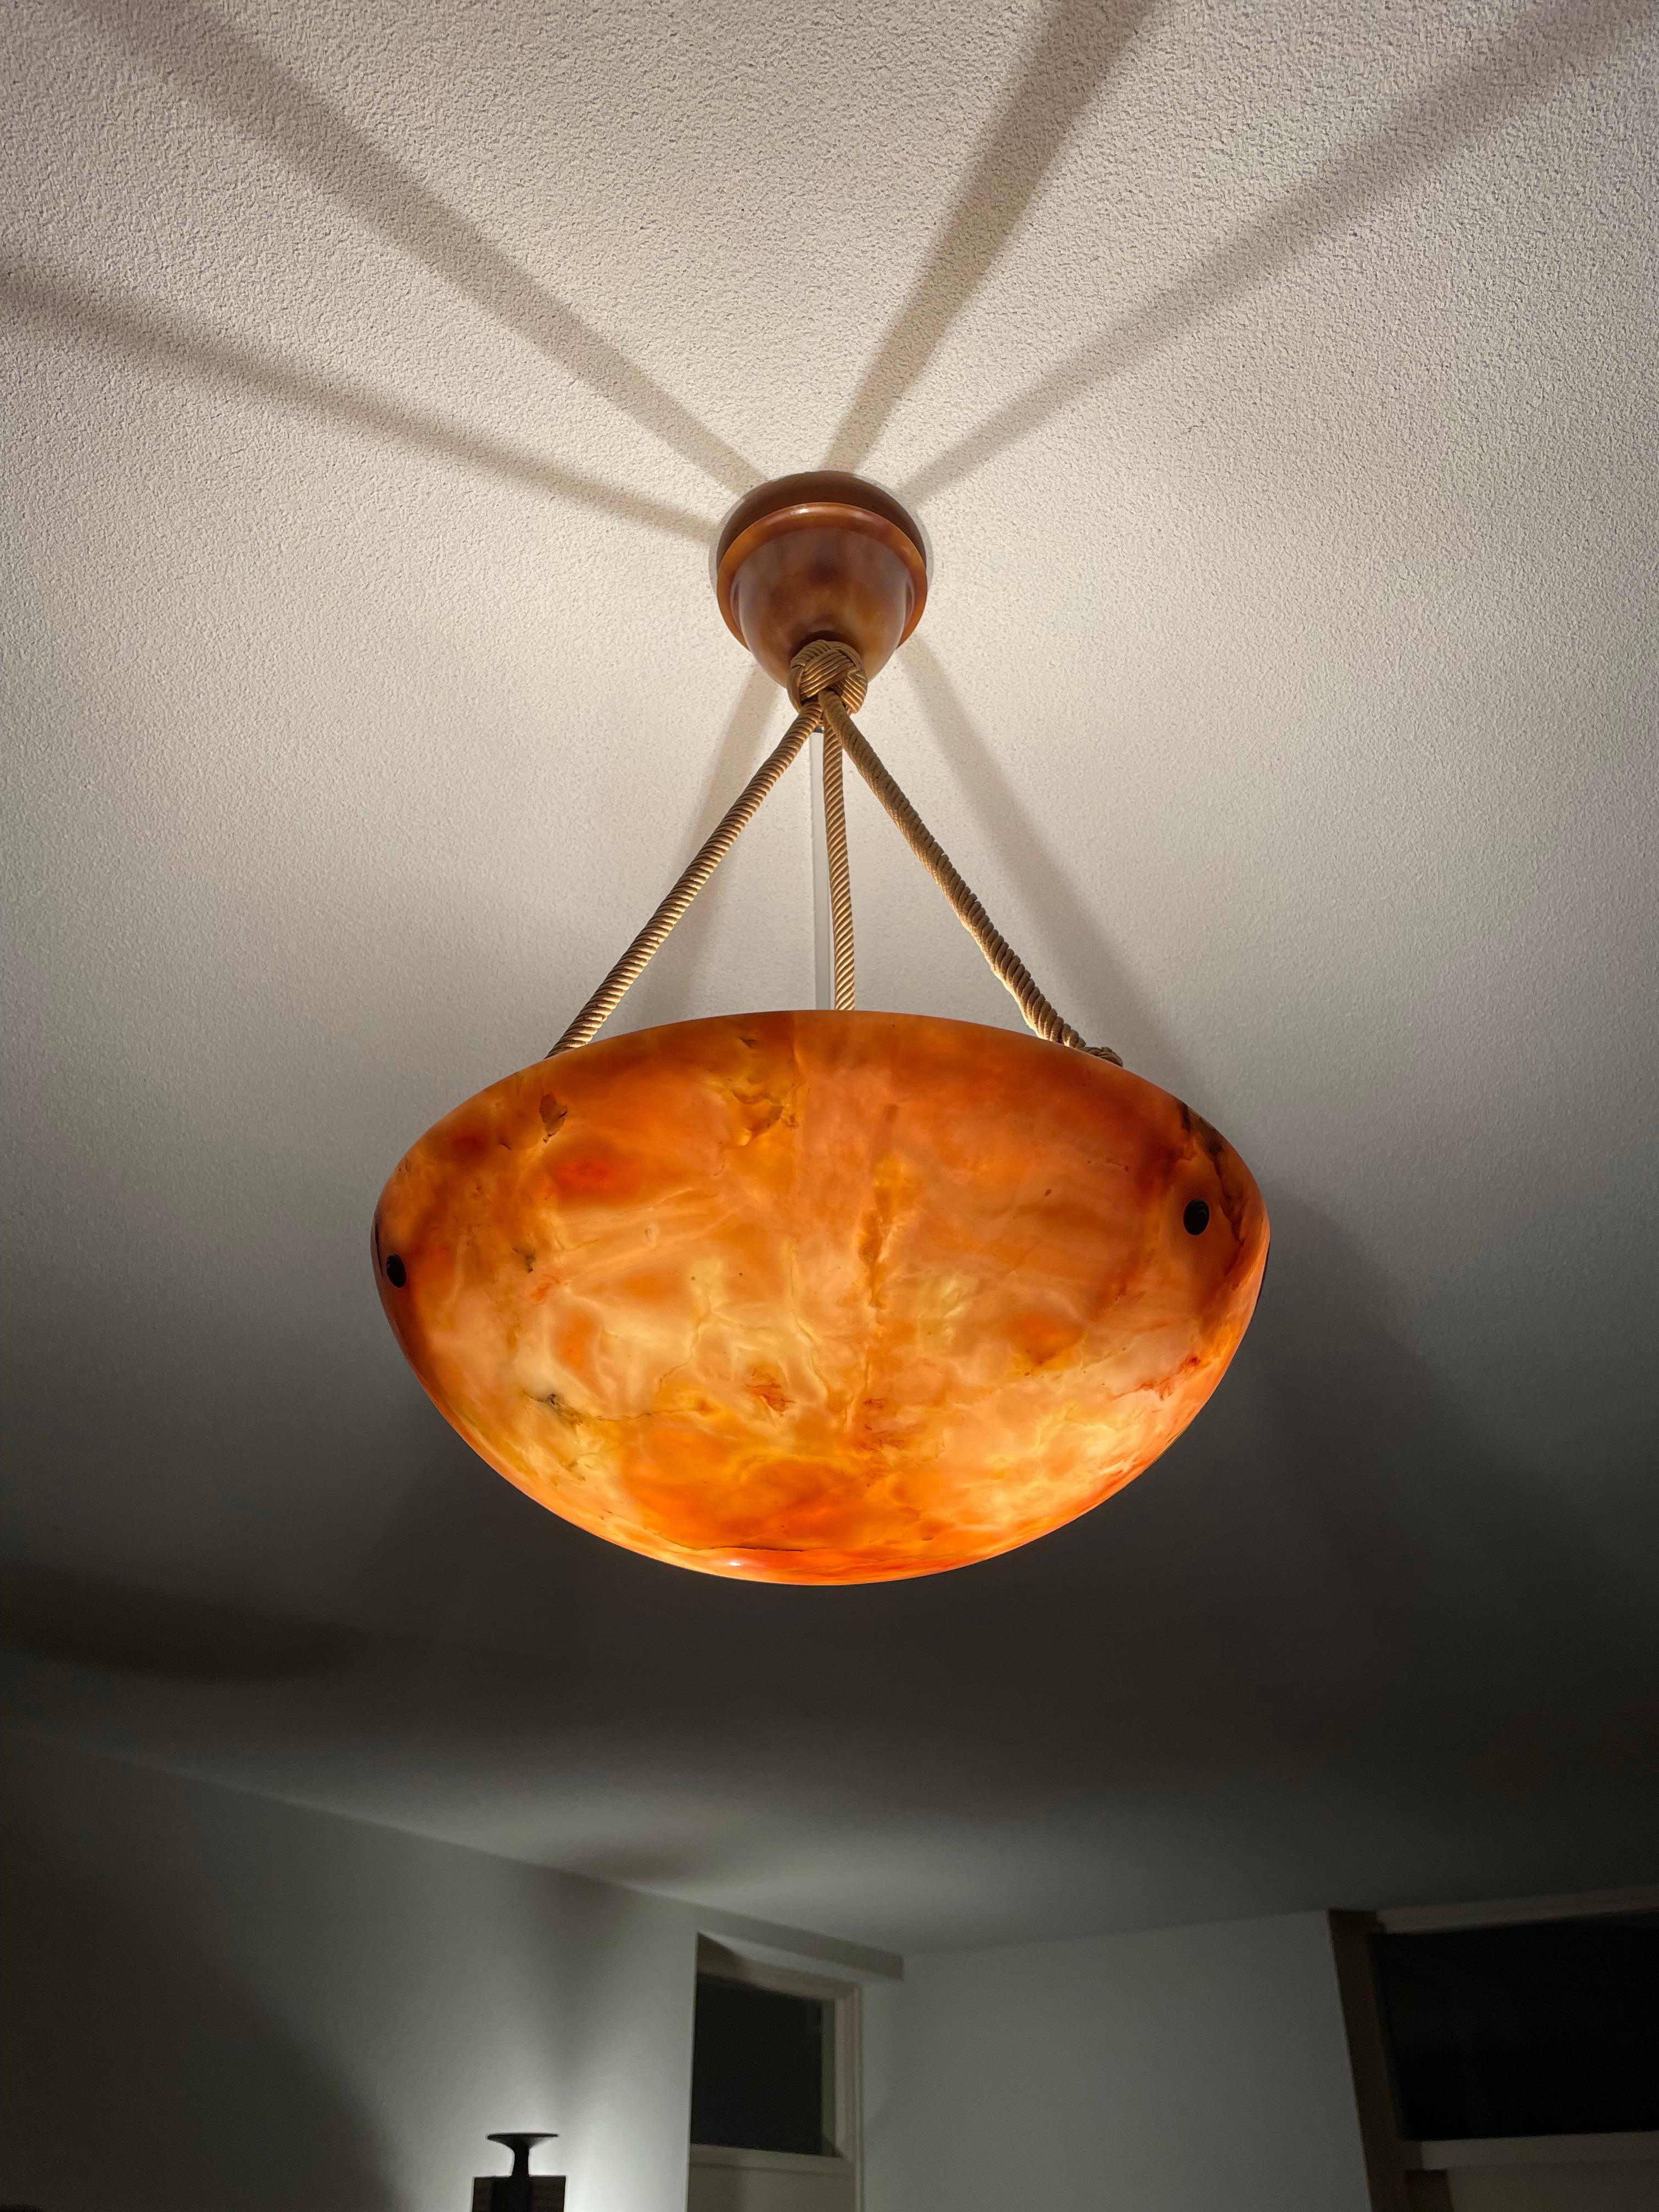 Timeless design and warmest color alabaster light with matching canopy.

If you are looking for a truly beautiful, great quality and all original alabaster pendant then this striking specimen could be the one or you. This regular size, but deep for